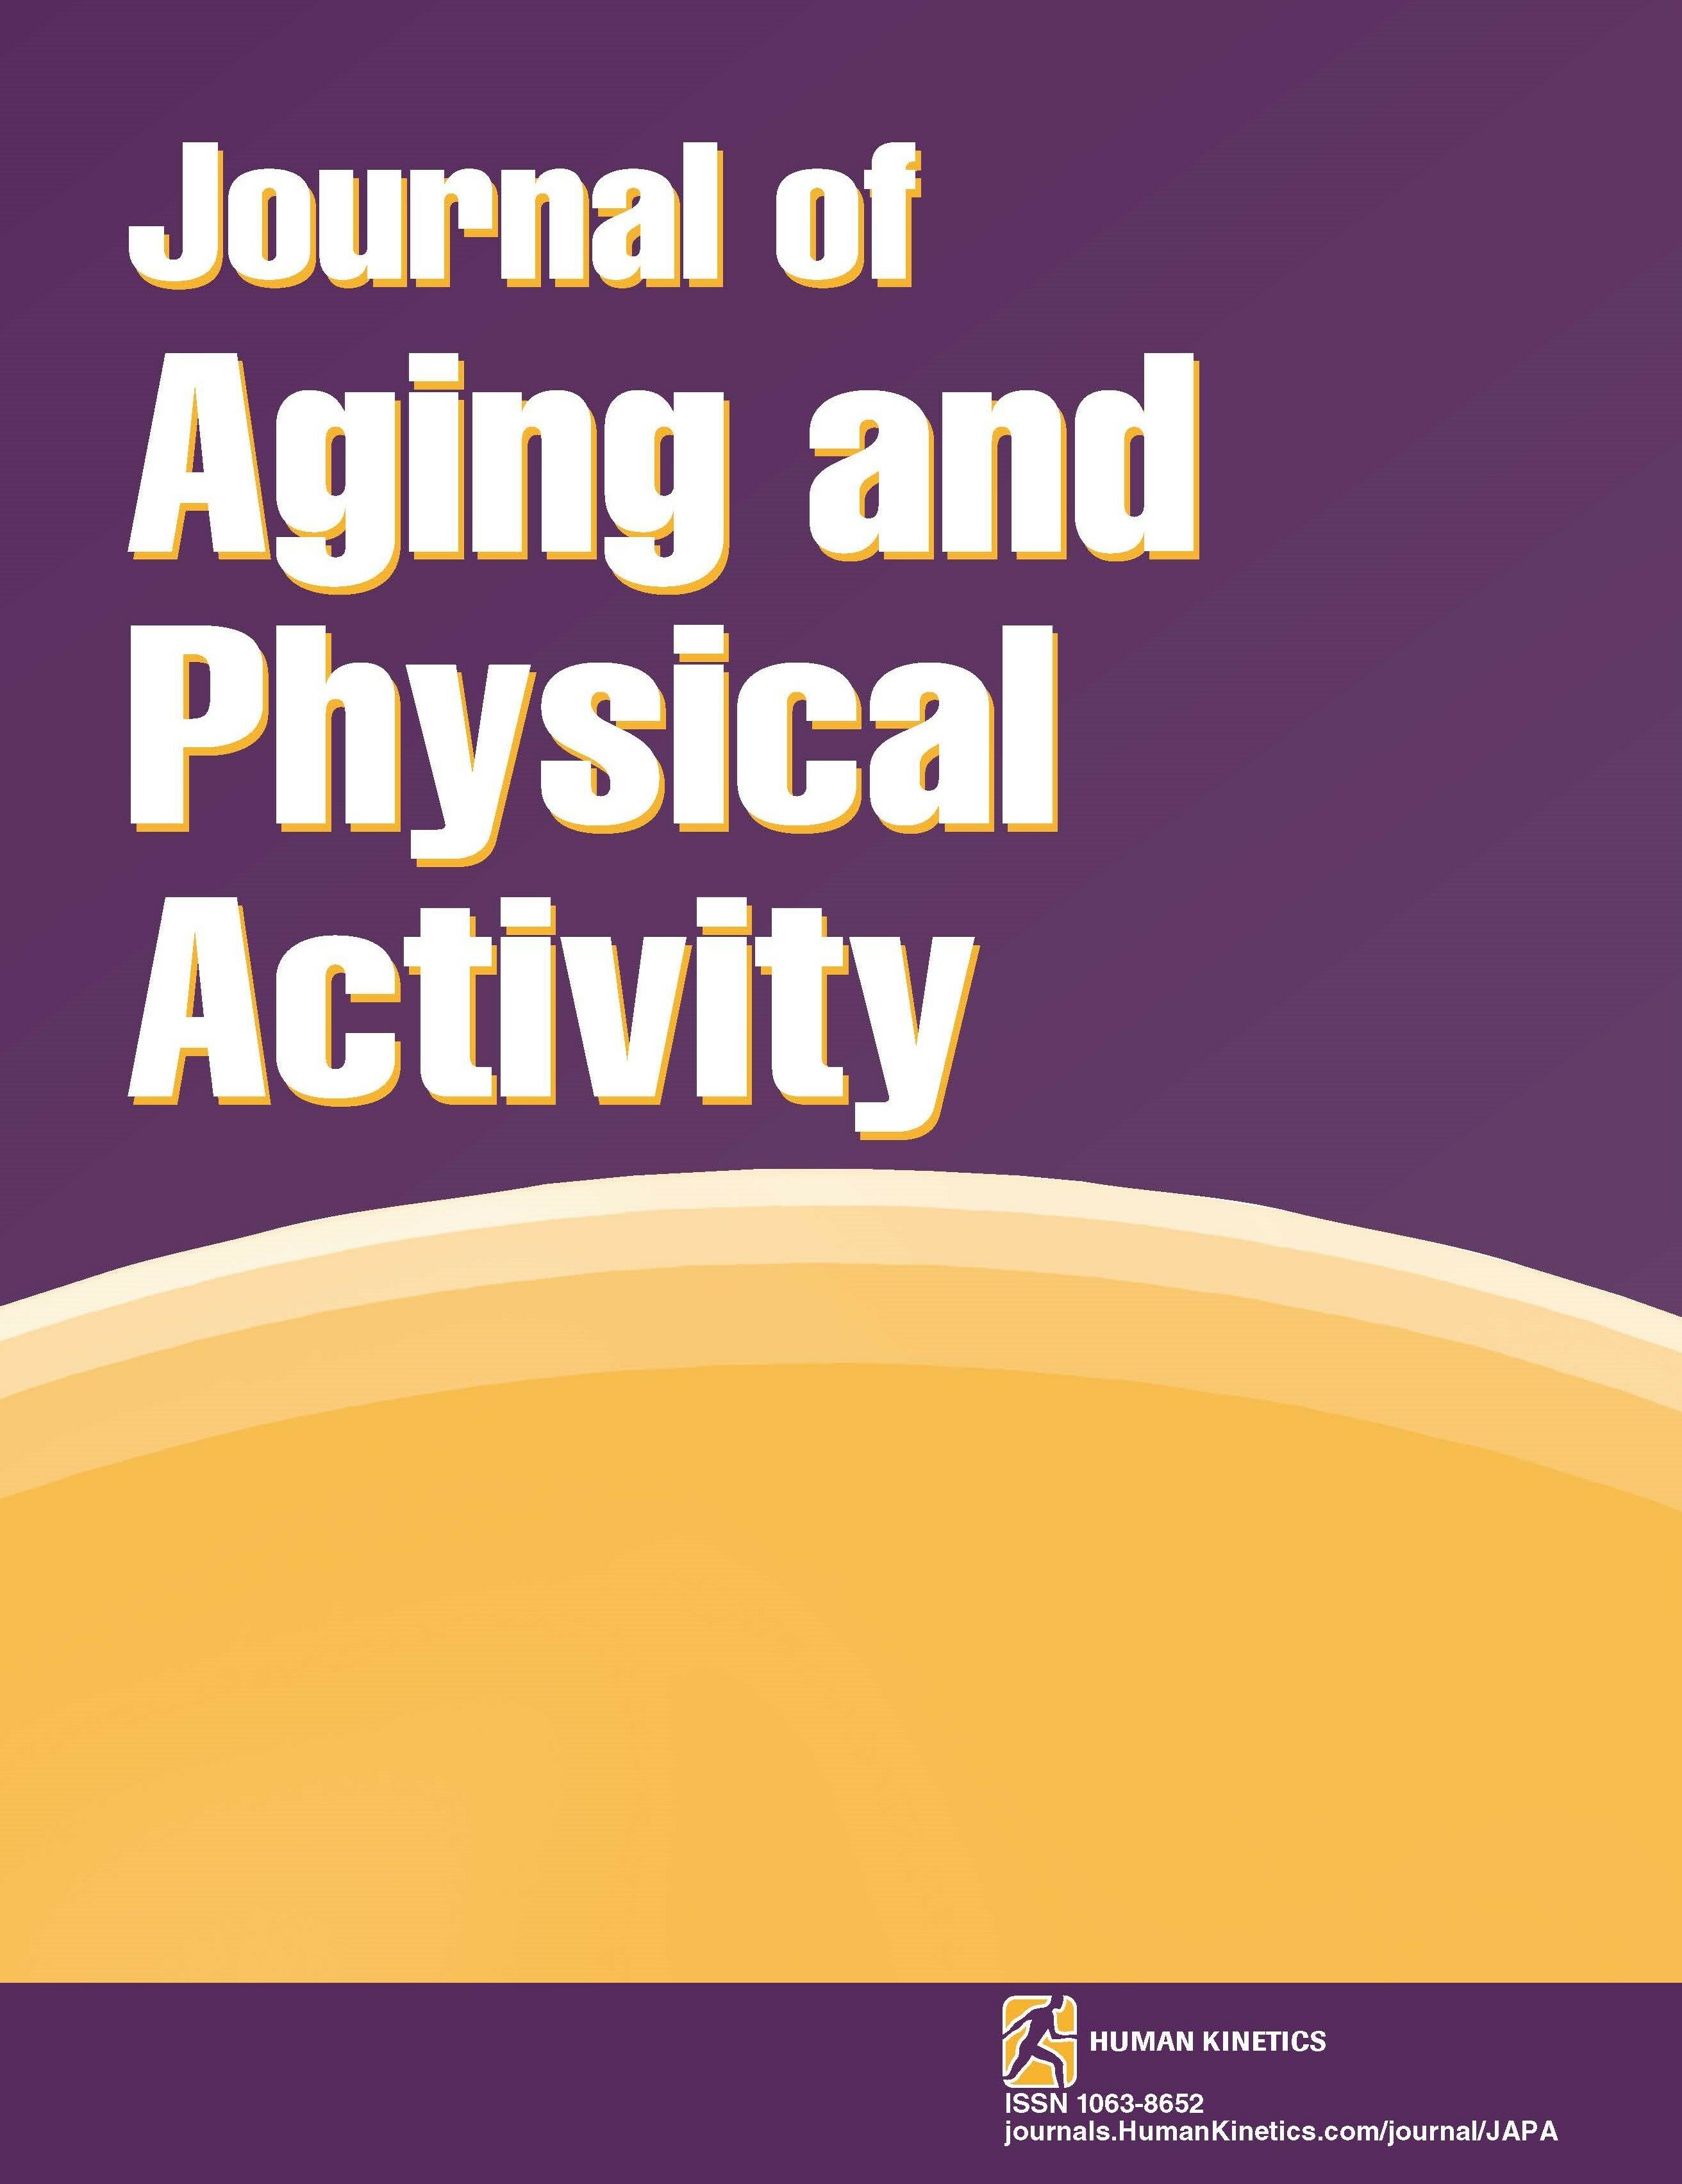 Physical Activity During the COVID-19 Stay-at-Home Order in Active Older Adults: A Qualitative Study